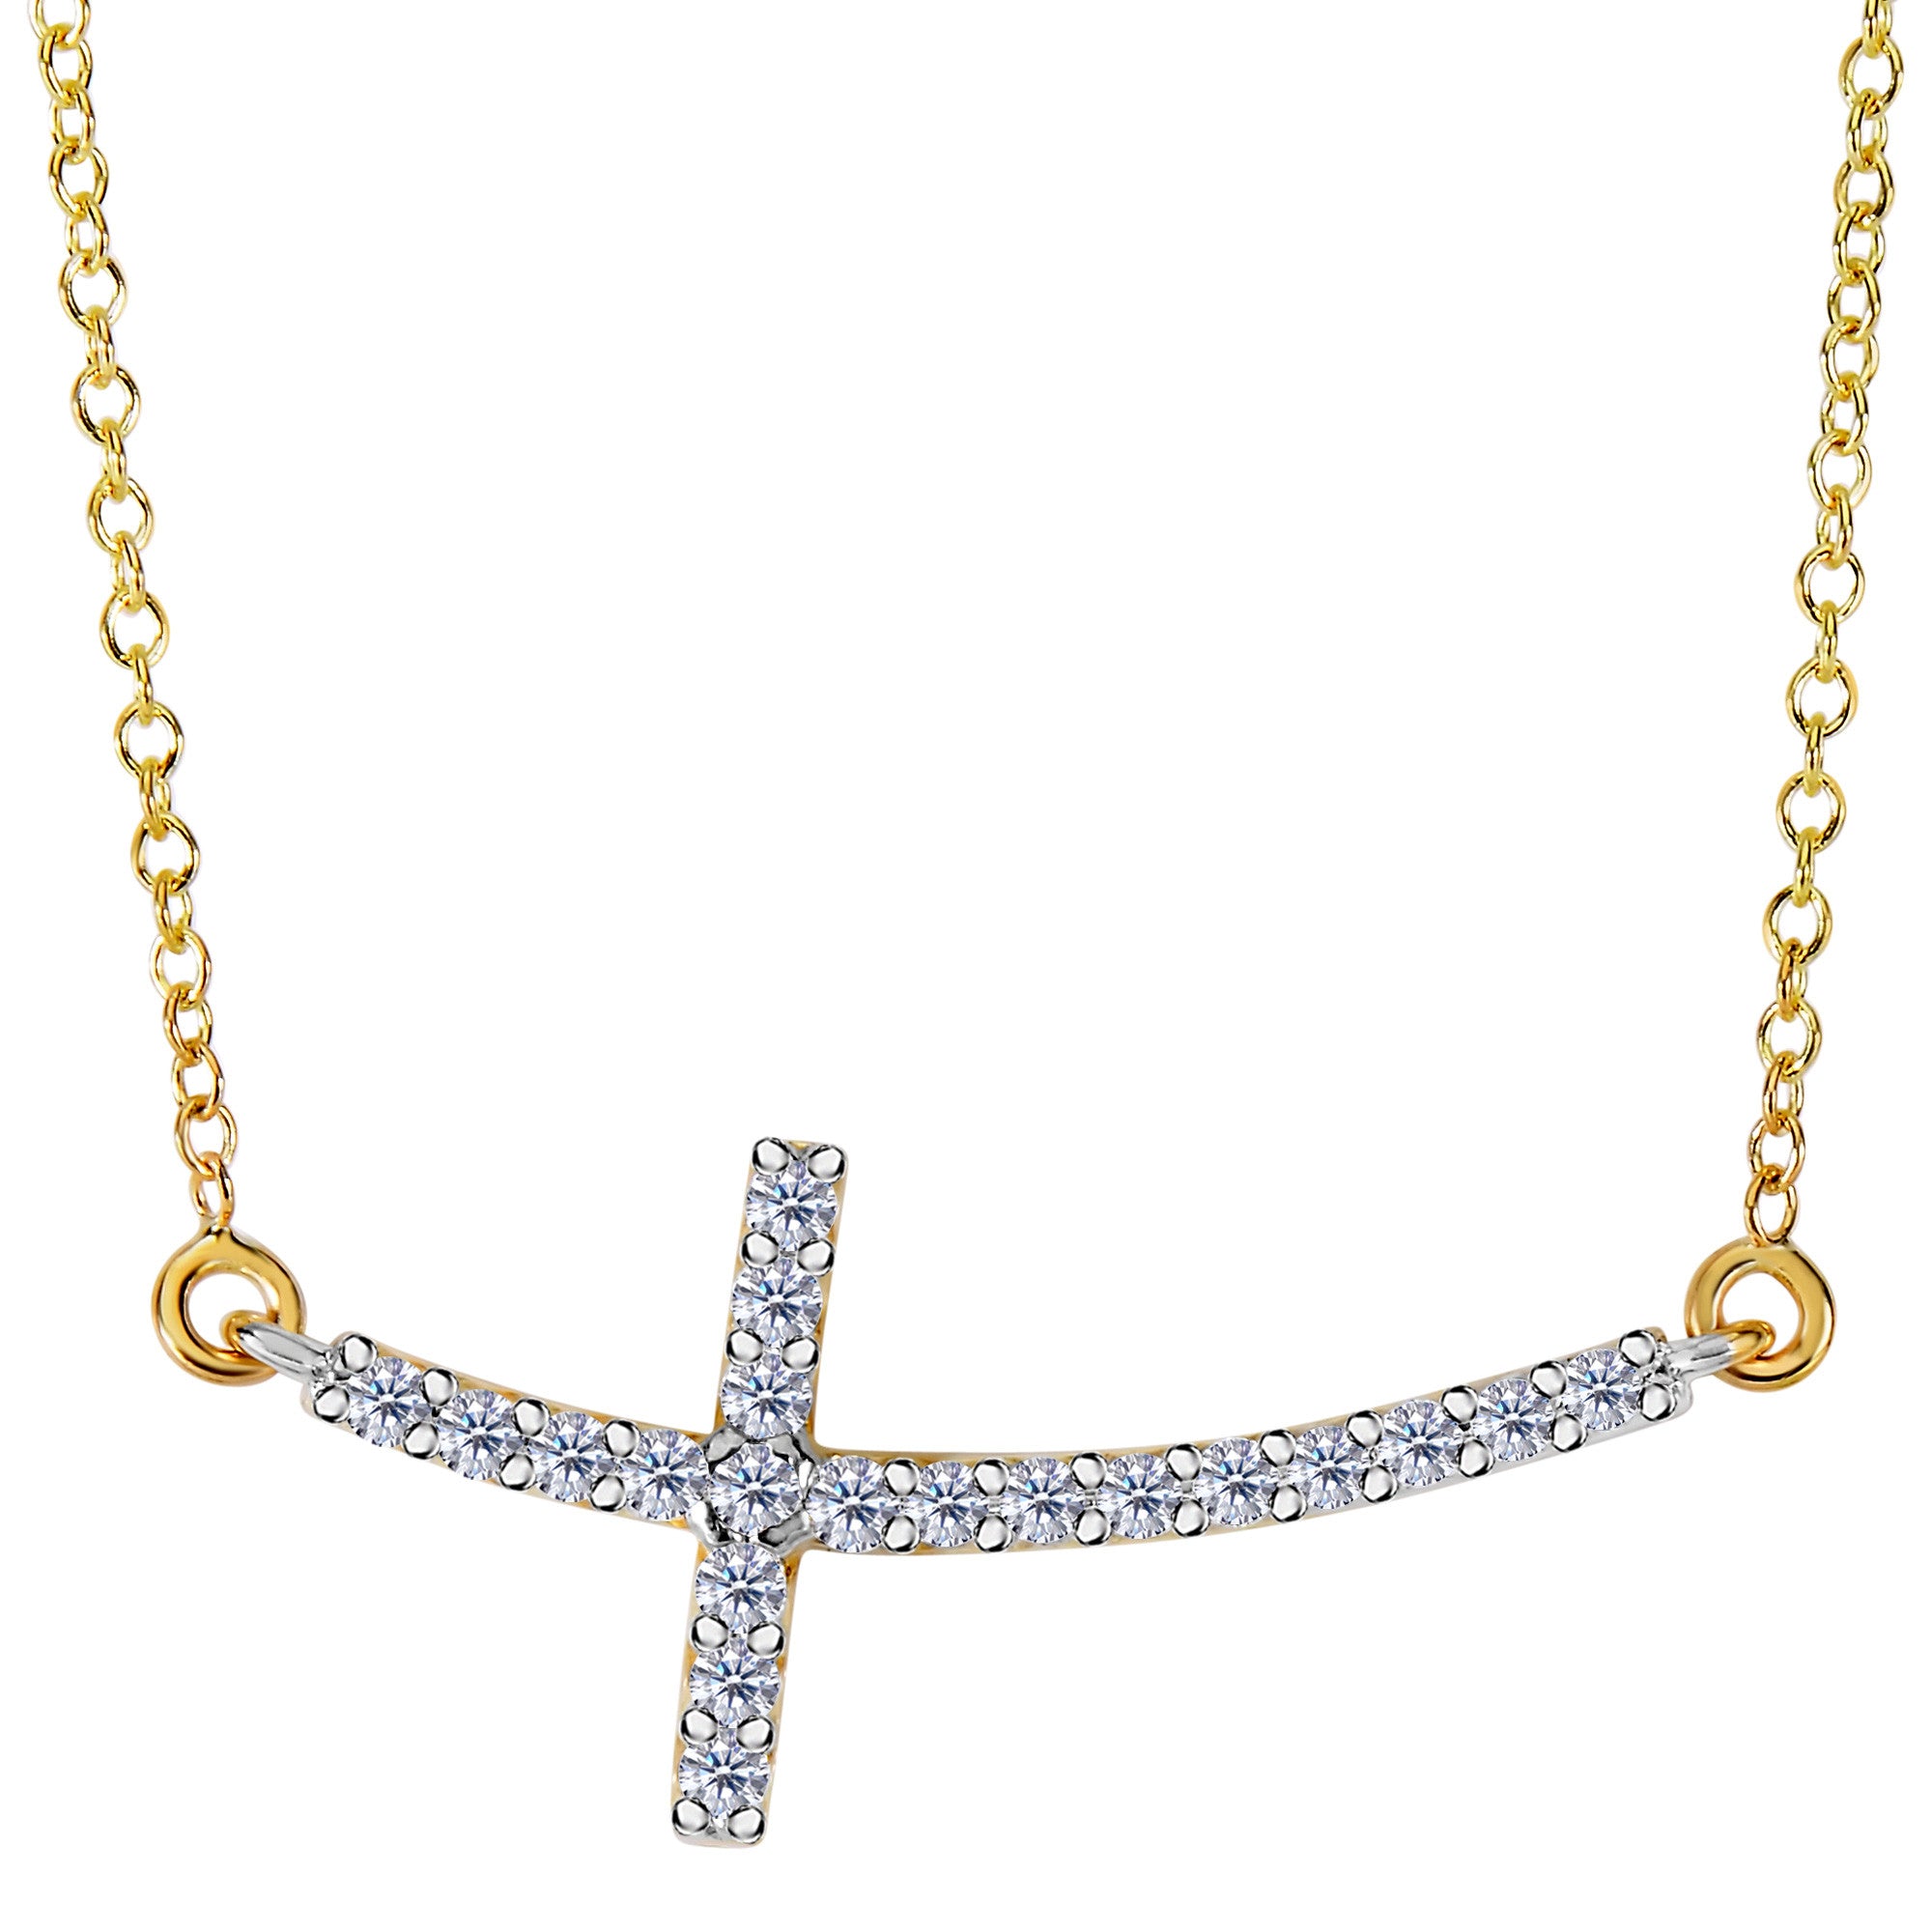 14k Yellow Gold With 0.22ct Diamonds Curved Side Ways Cross Necklace - 18 Inches